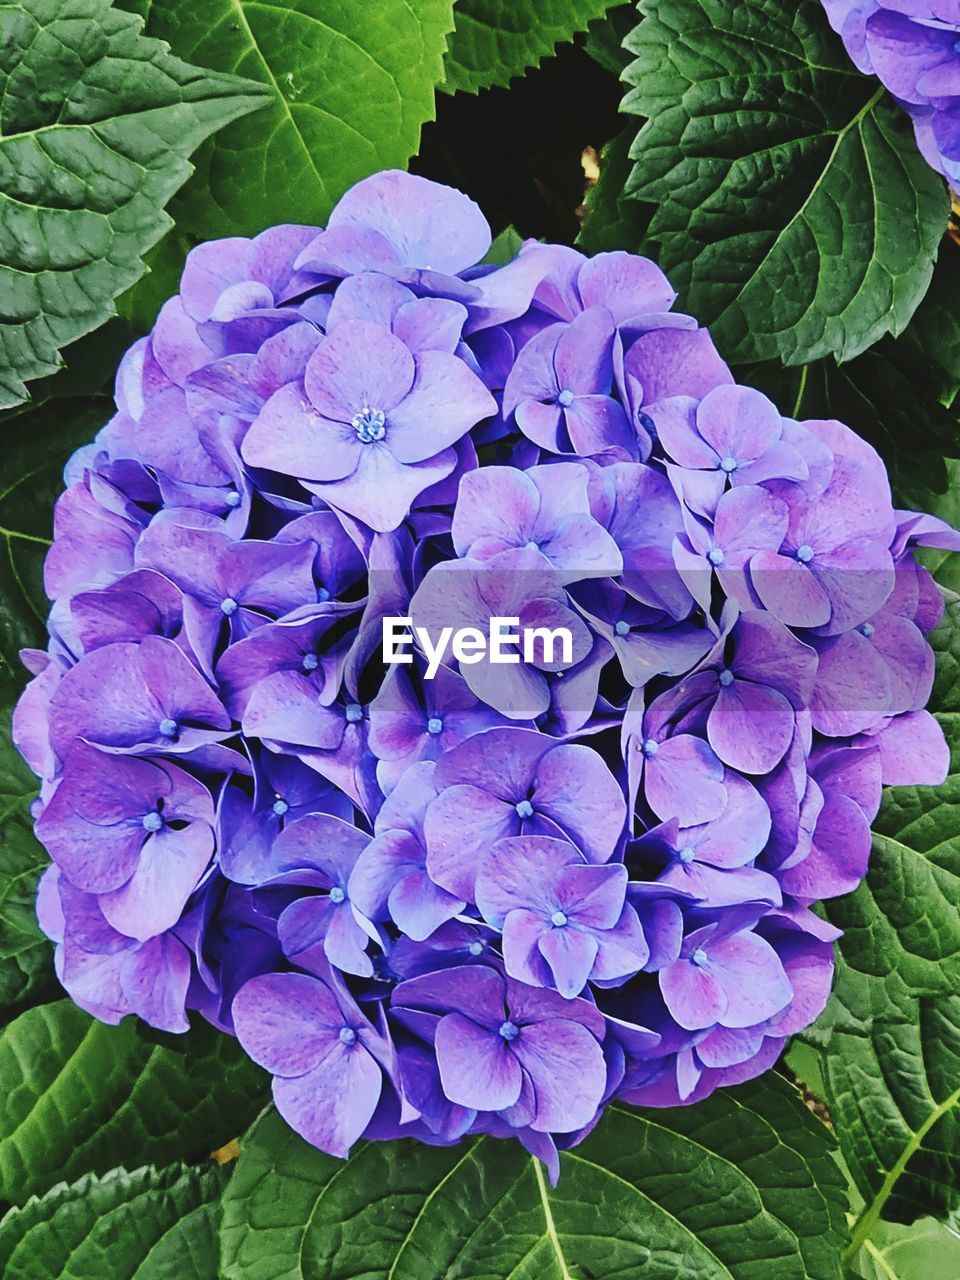 plant, flower, flowering plant, beauty in nature, freshness, growth, leaf, plant part, petal, purple, fragility, close-up, nature, inflorescence, flower head, hydrangea, day, high angle view, no people, springtime, outdoors, botany, directly above, green